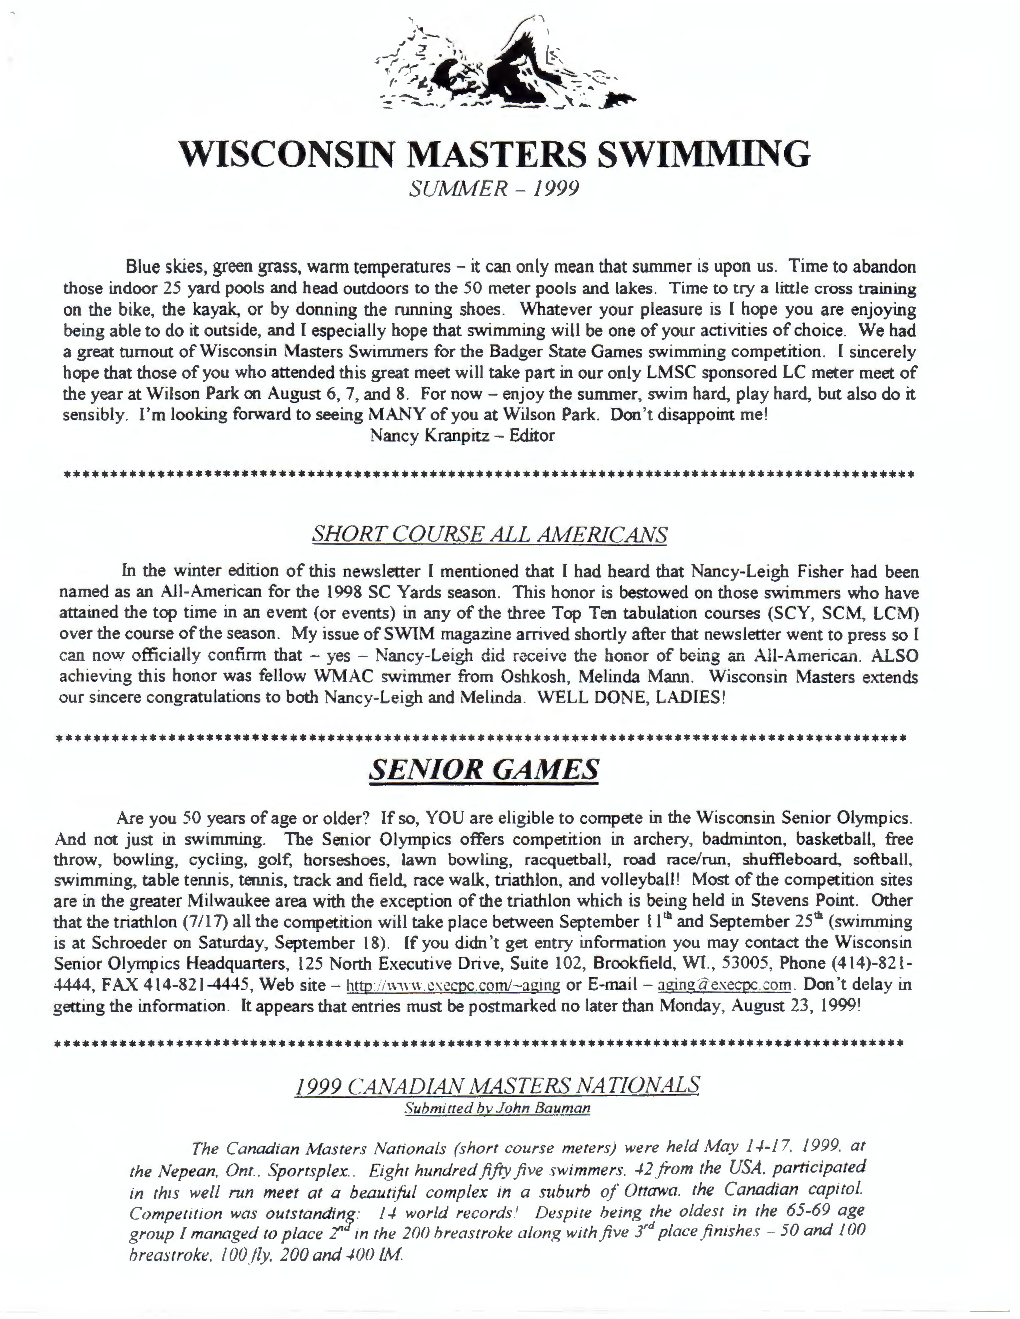 Wisconsin Masters Swimming Summer - 1999